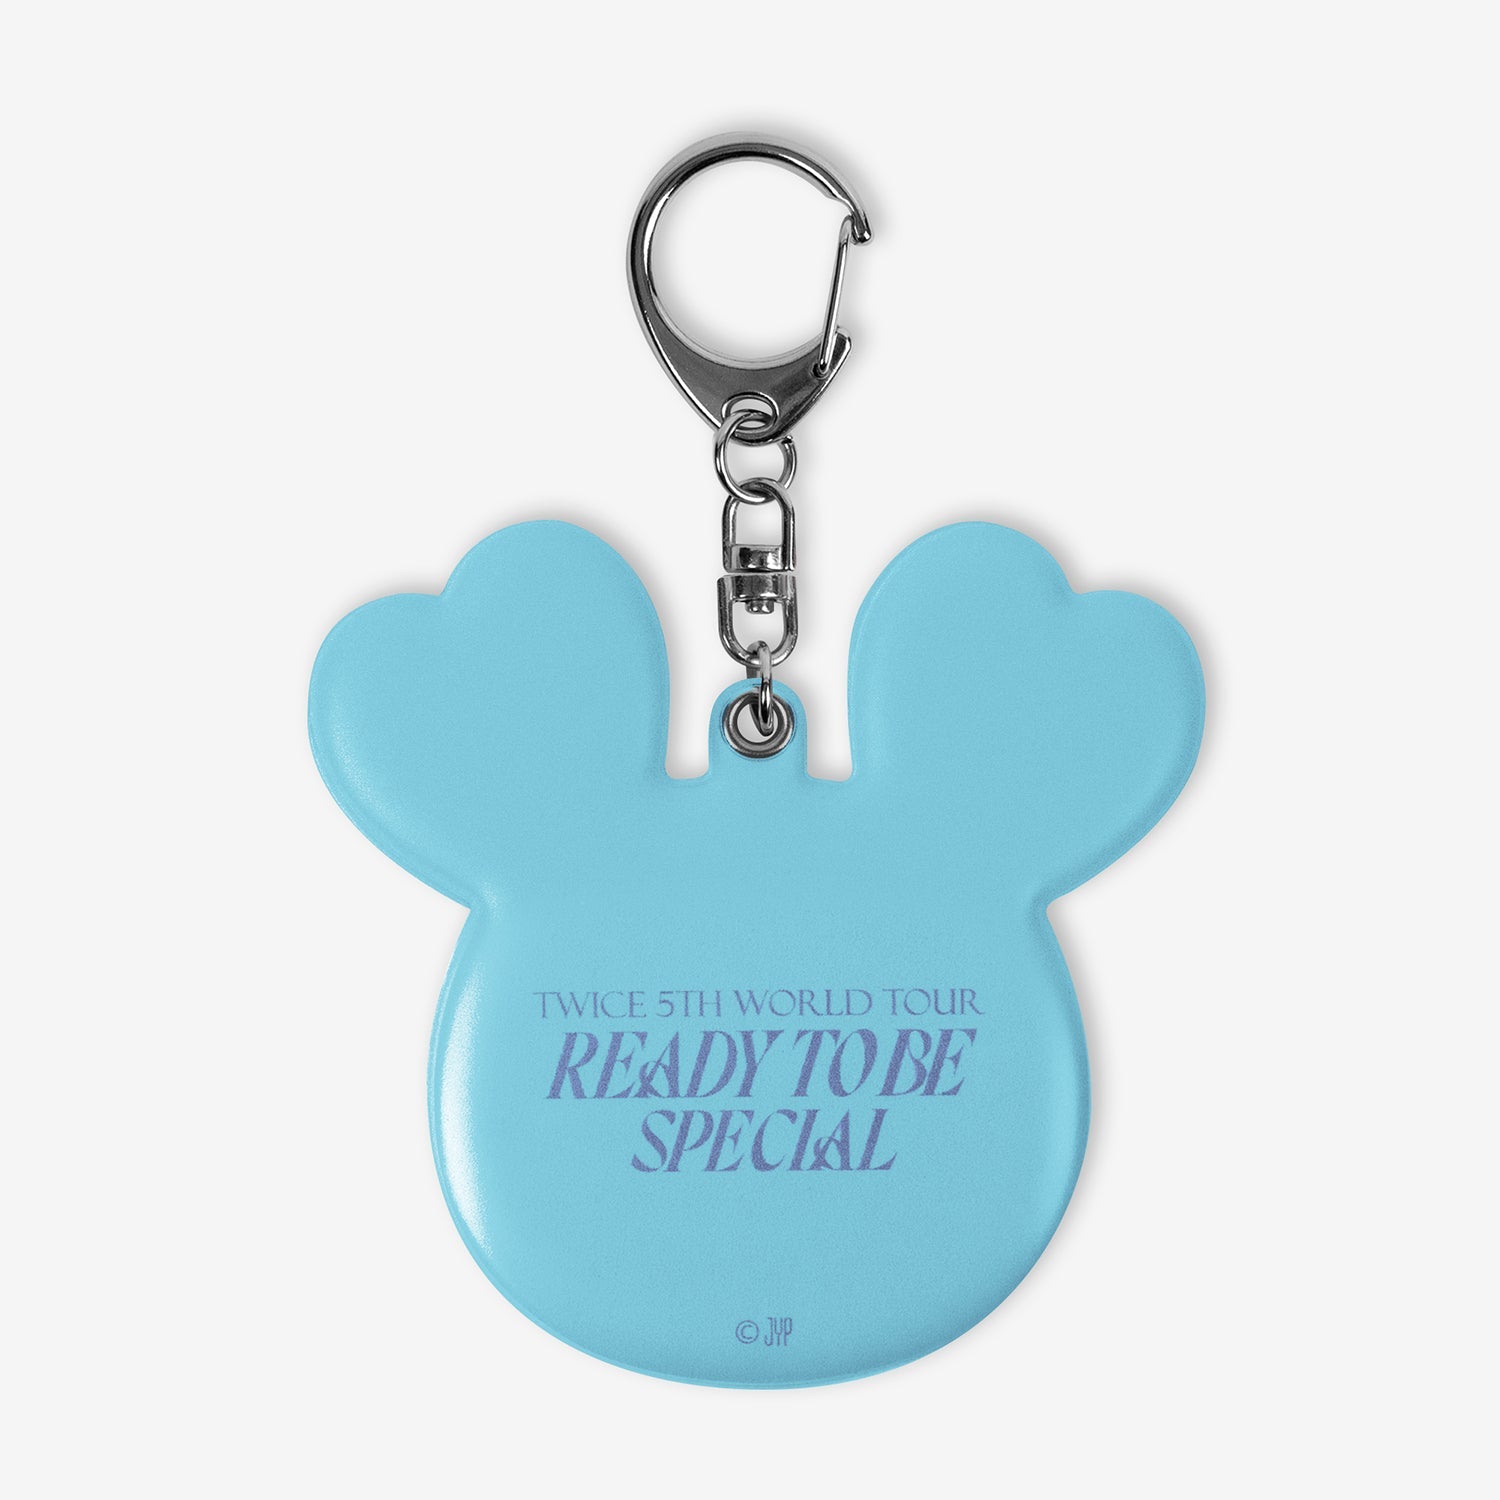 TWICE LOVELYS SLIDE MIRROR - NAVELY / TWICE『READY TO BE SPECIAL』